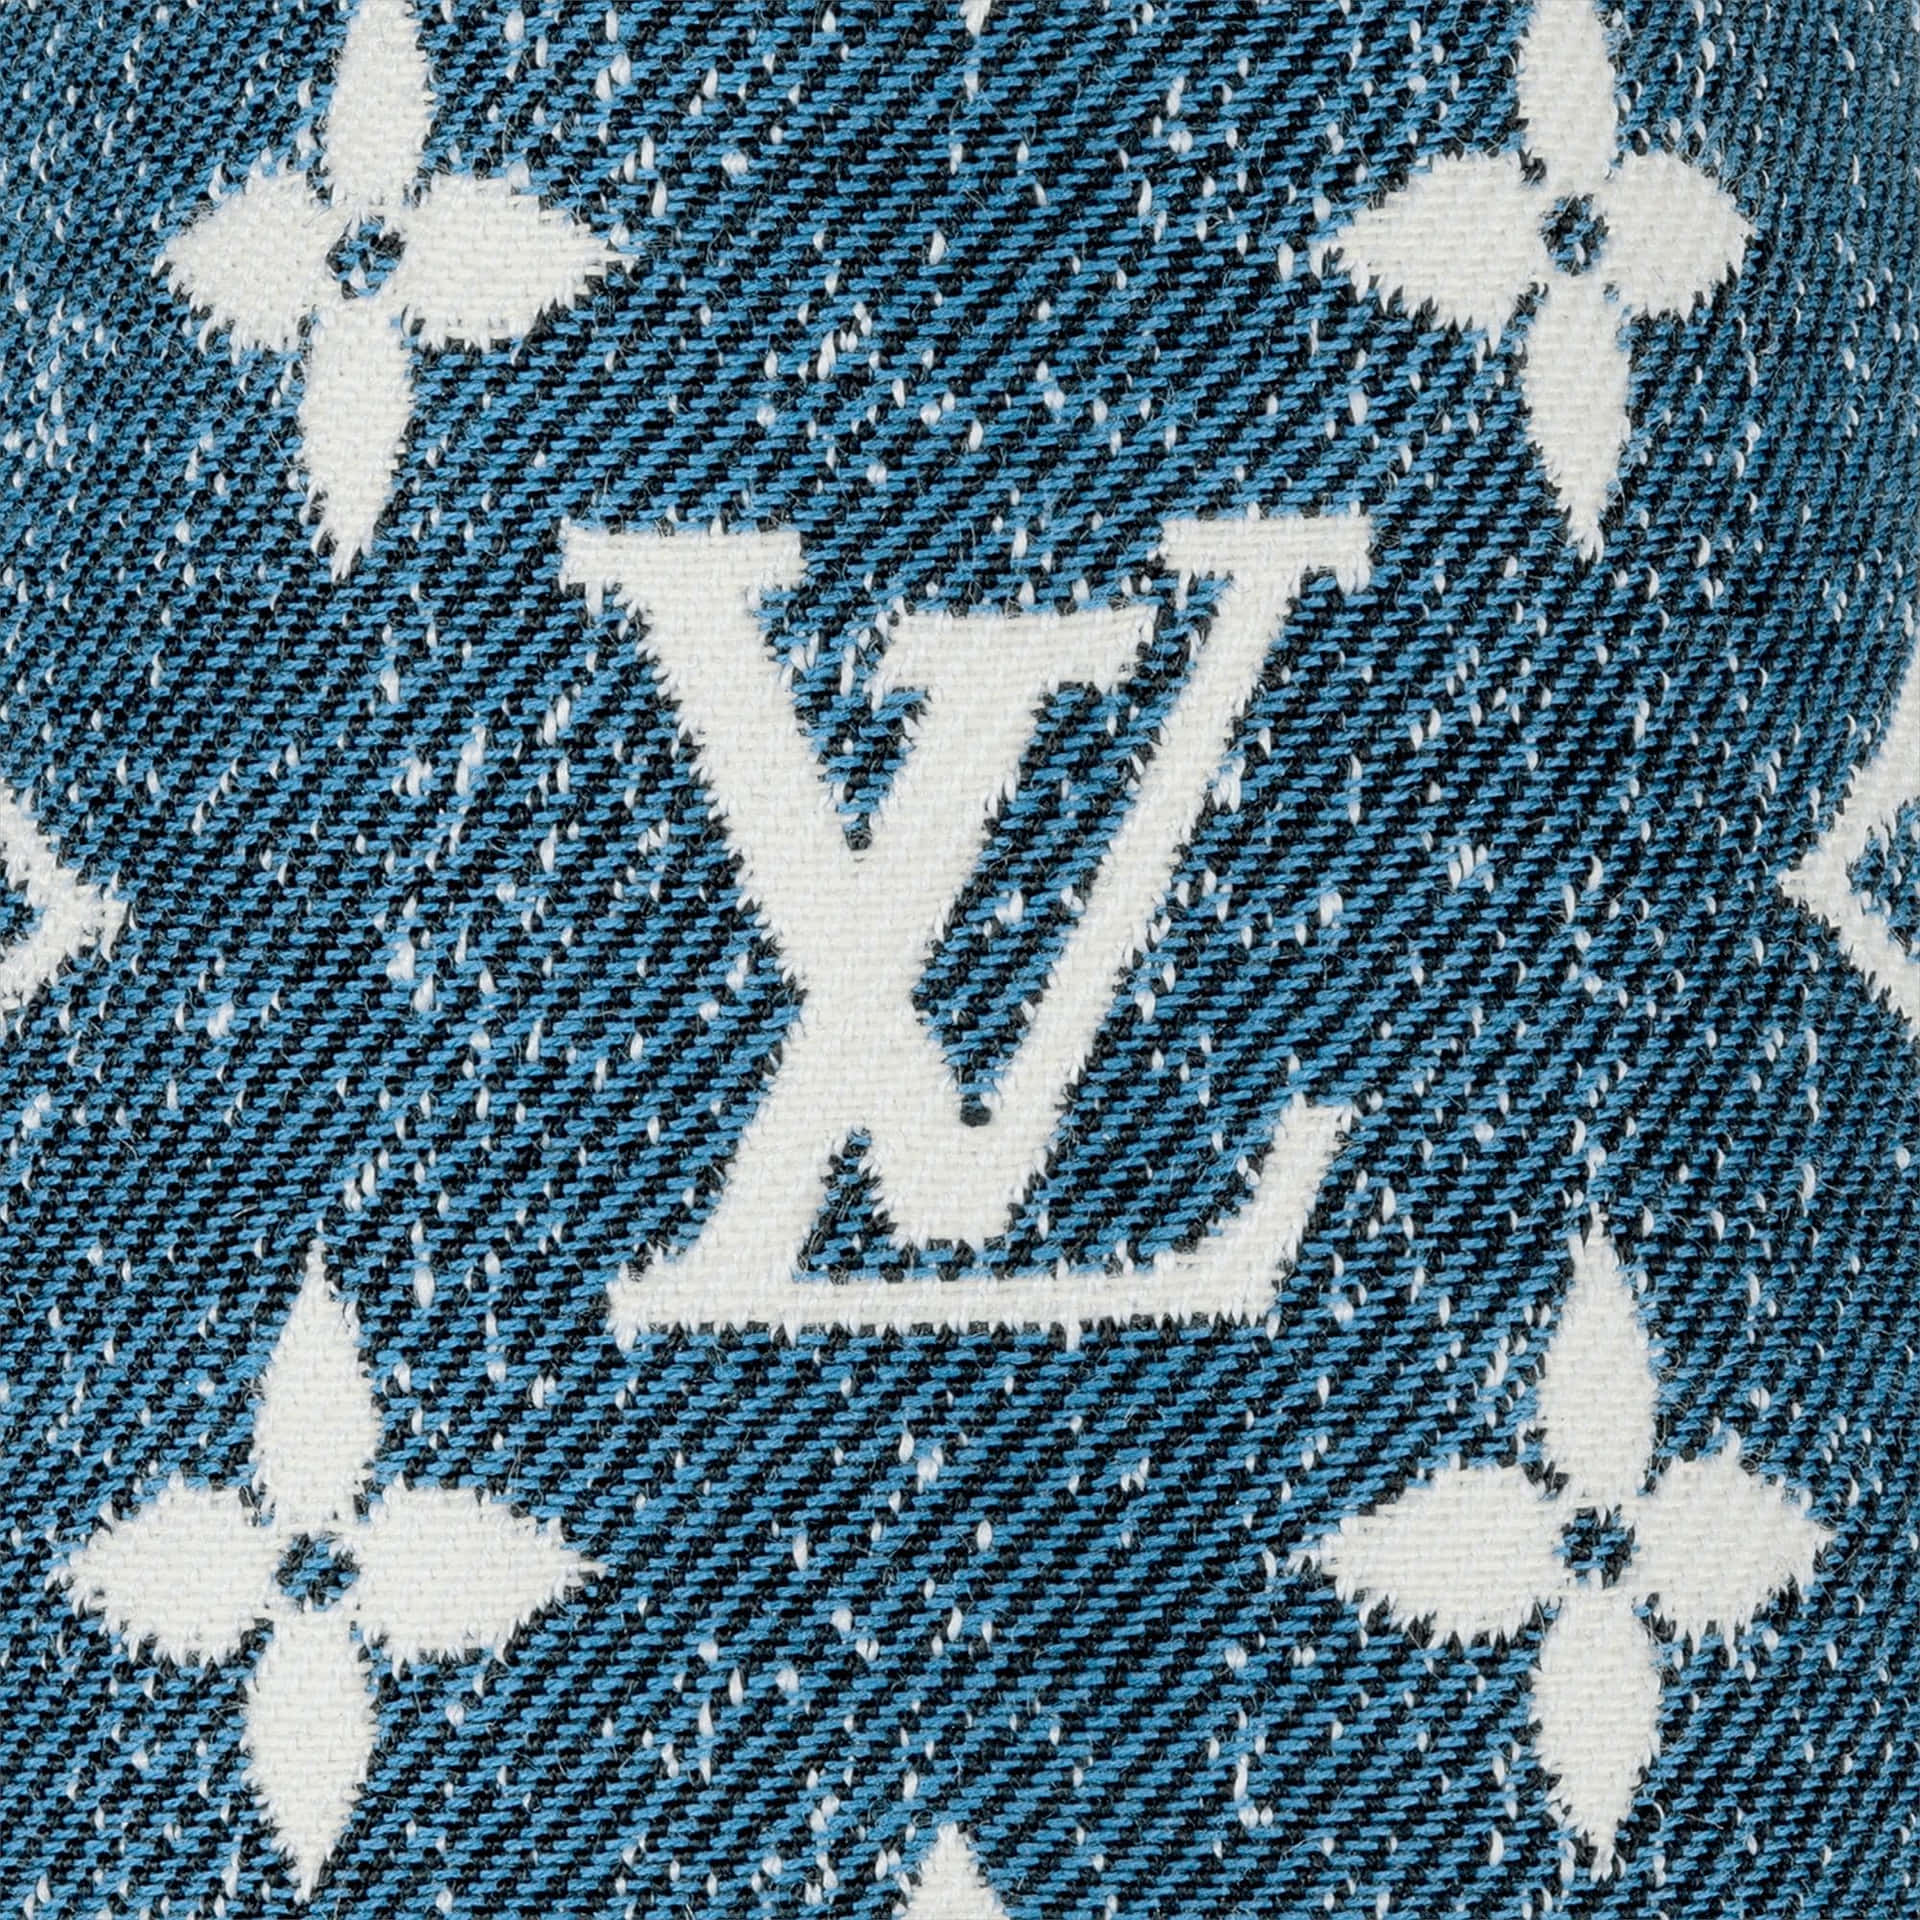 Louis Vuitton wallpaper by jxgaming231 - Download on ZEDGE™